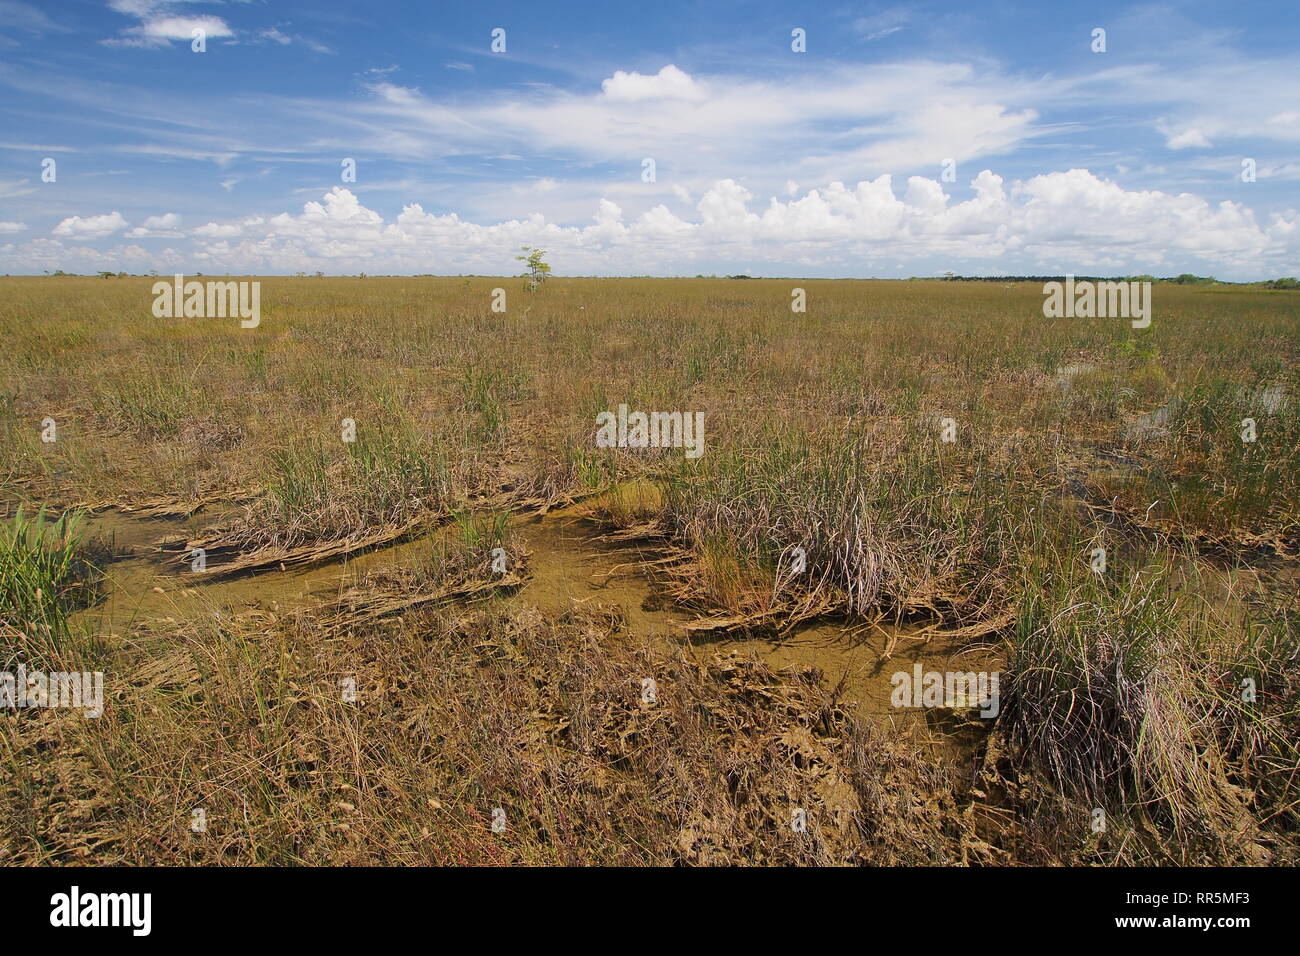 Clouds over the expanse of sawgrass in Everglades National Park, Florida. Stock Photo